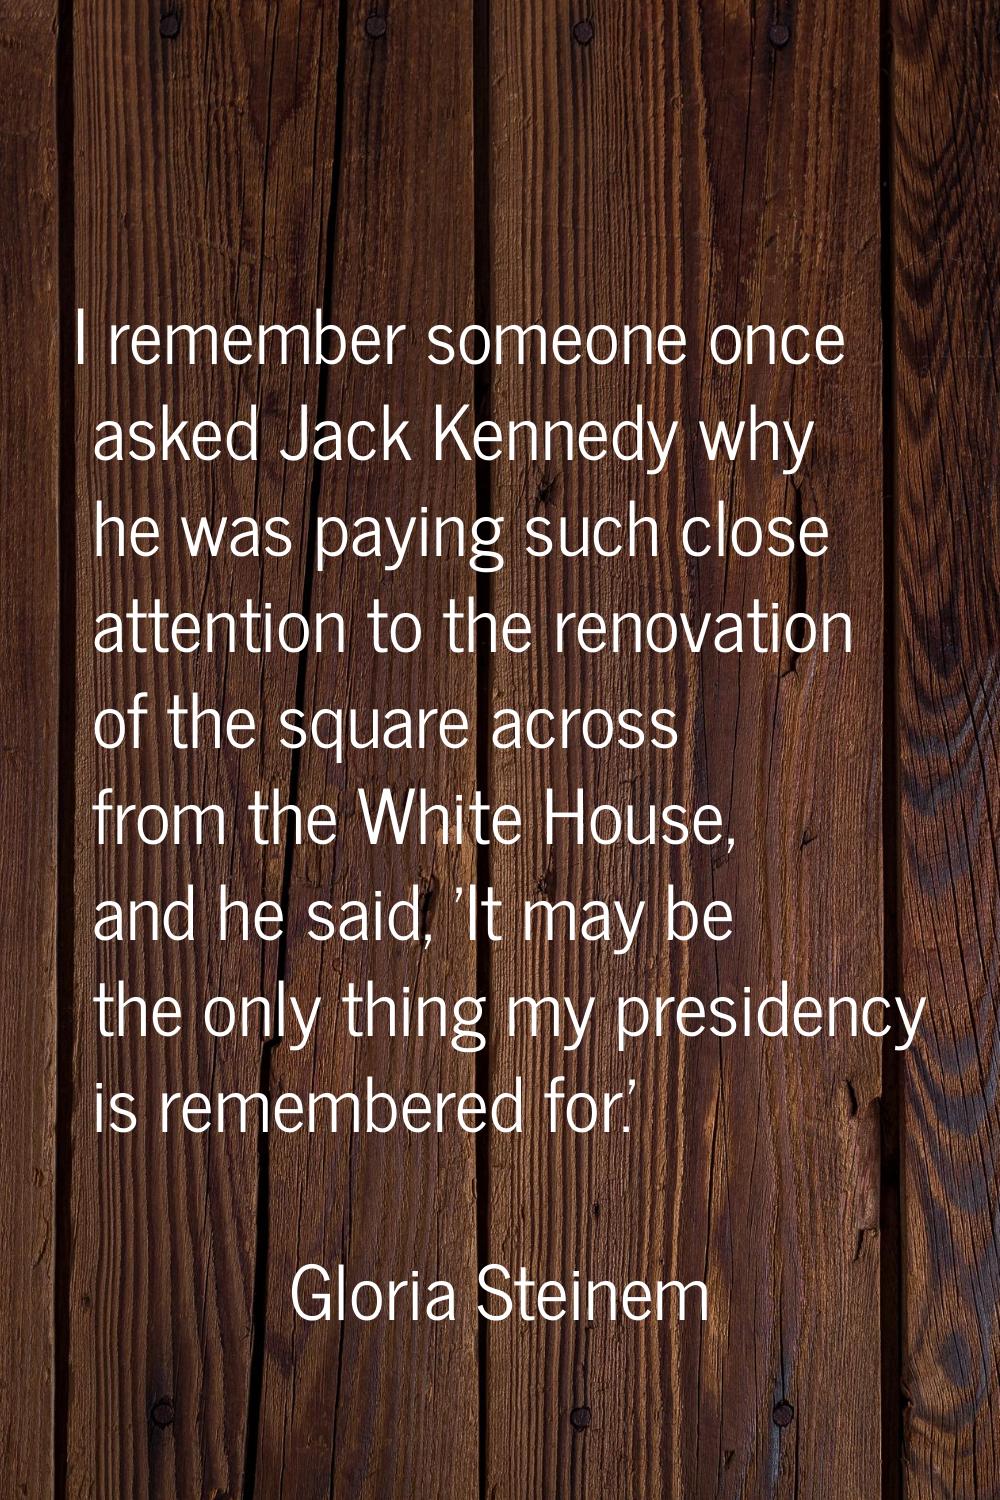 I remember someone once asked Jack Kennedy why he was paying such close attention to the renovation